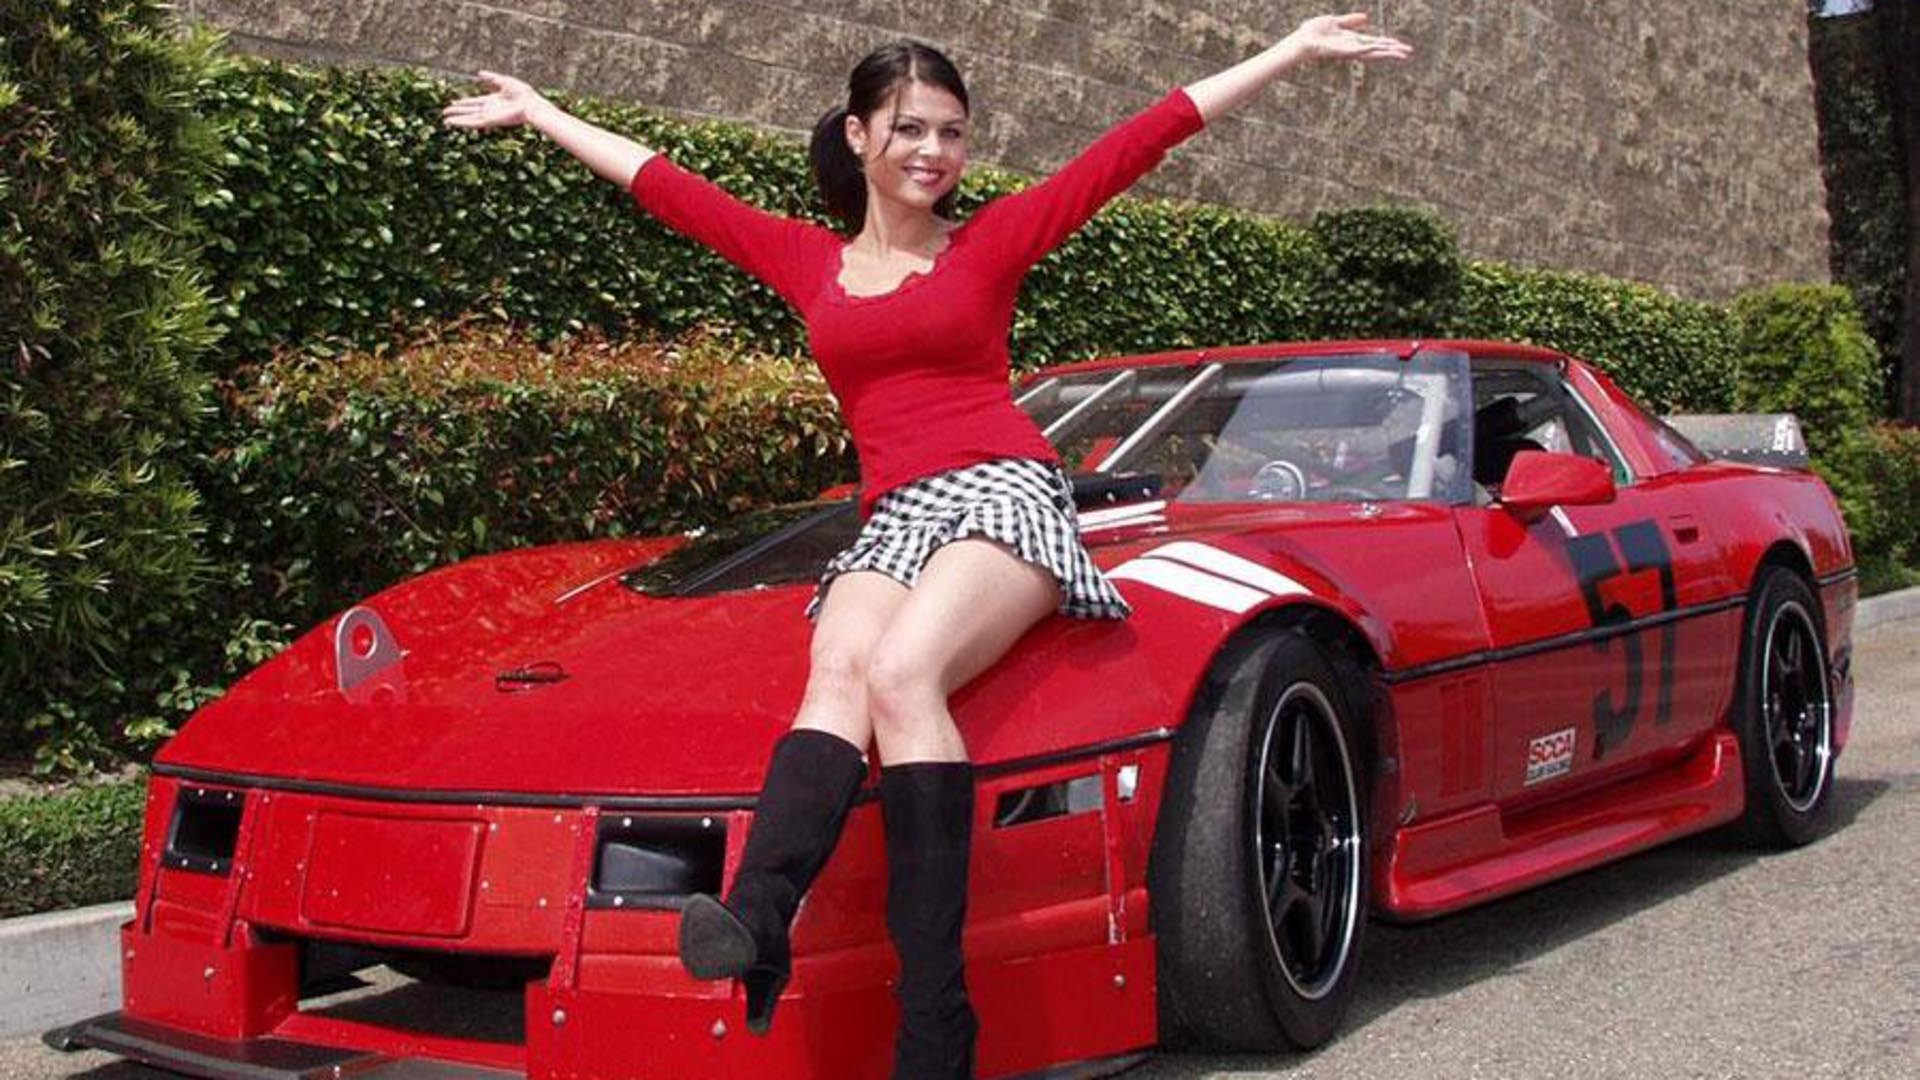 1920x1080 Exotic Red Car And Girl In Red Dress Wallpapers